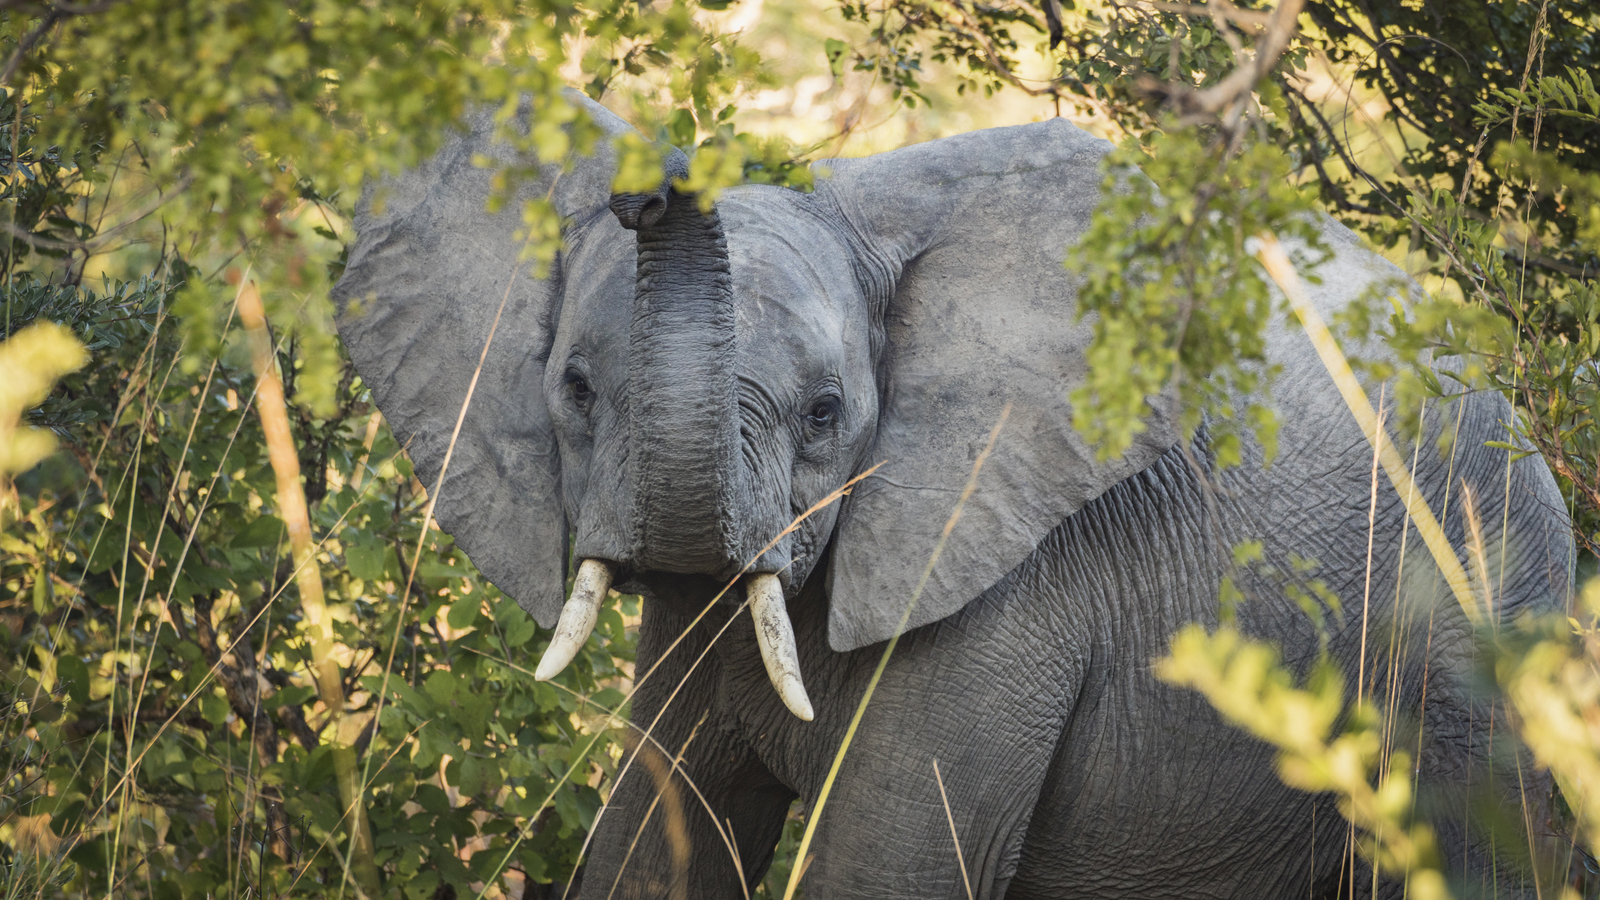 Elephants in Ngoma Forest at Kafue National Park in Zambia. The Conservancy is working with the people of Zambia to ensure the protection of elephants by strengthening anti-poaching security. Photo © Karine Aigner